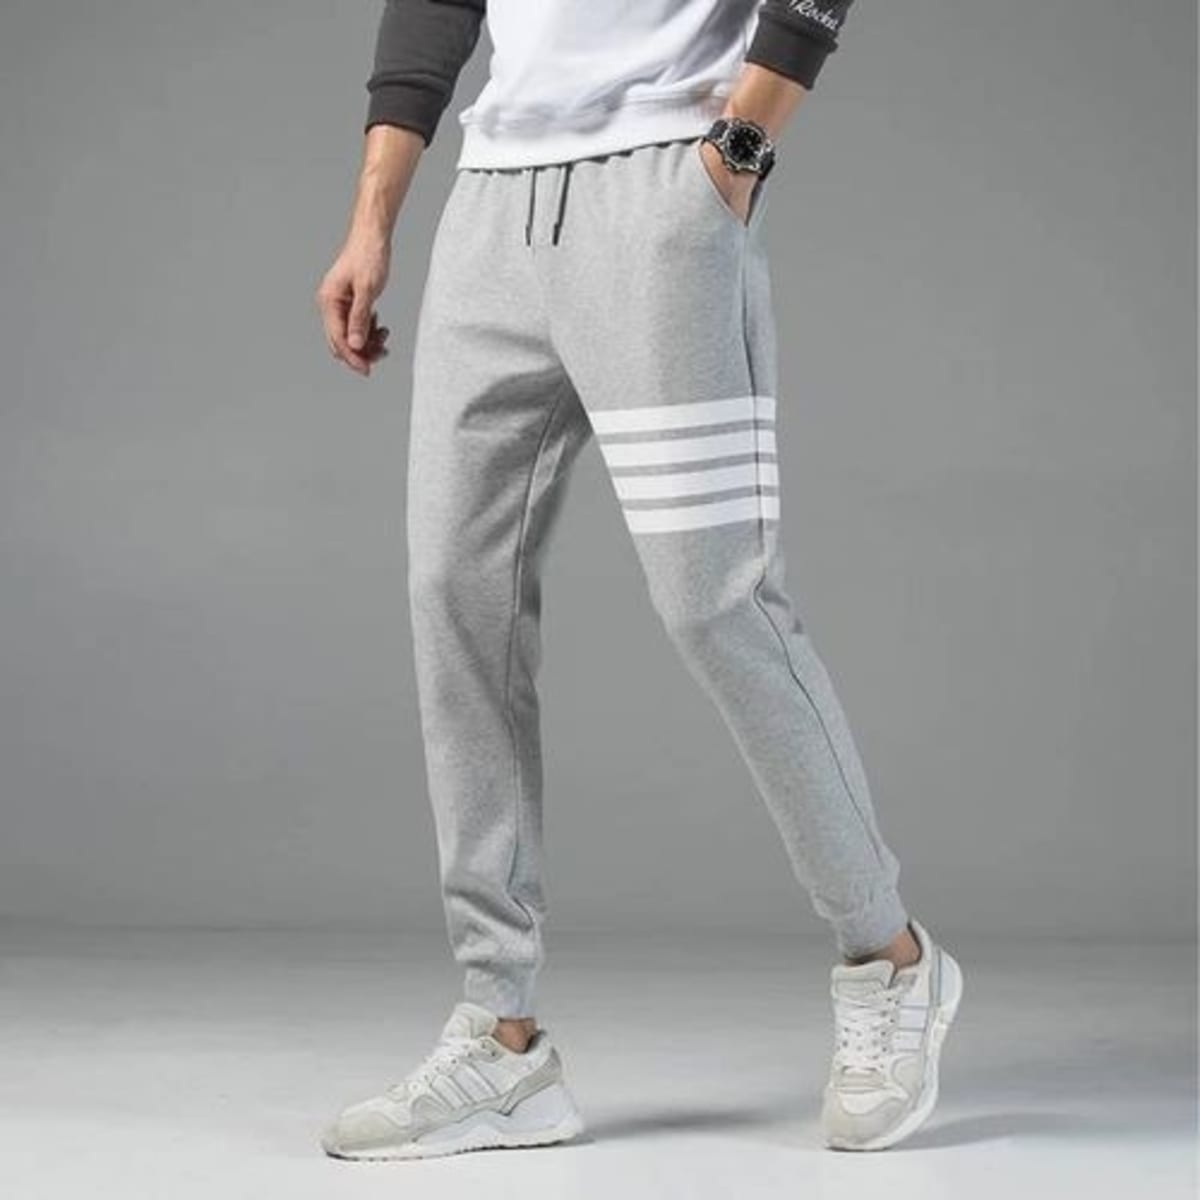 Fashion House Joggers Sweatpants With Thigh Stripes - Grey